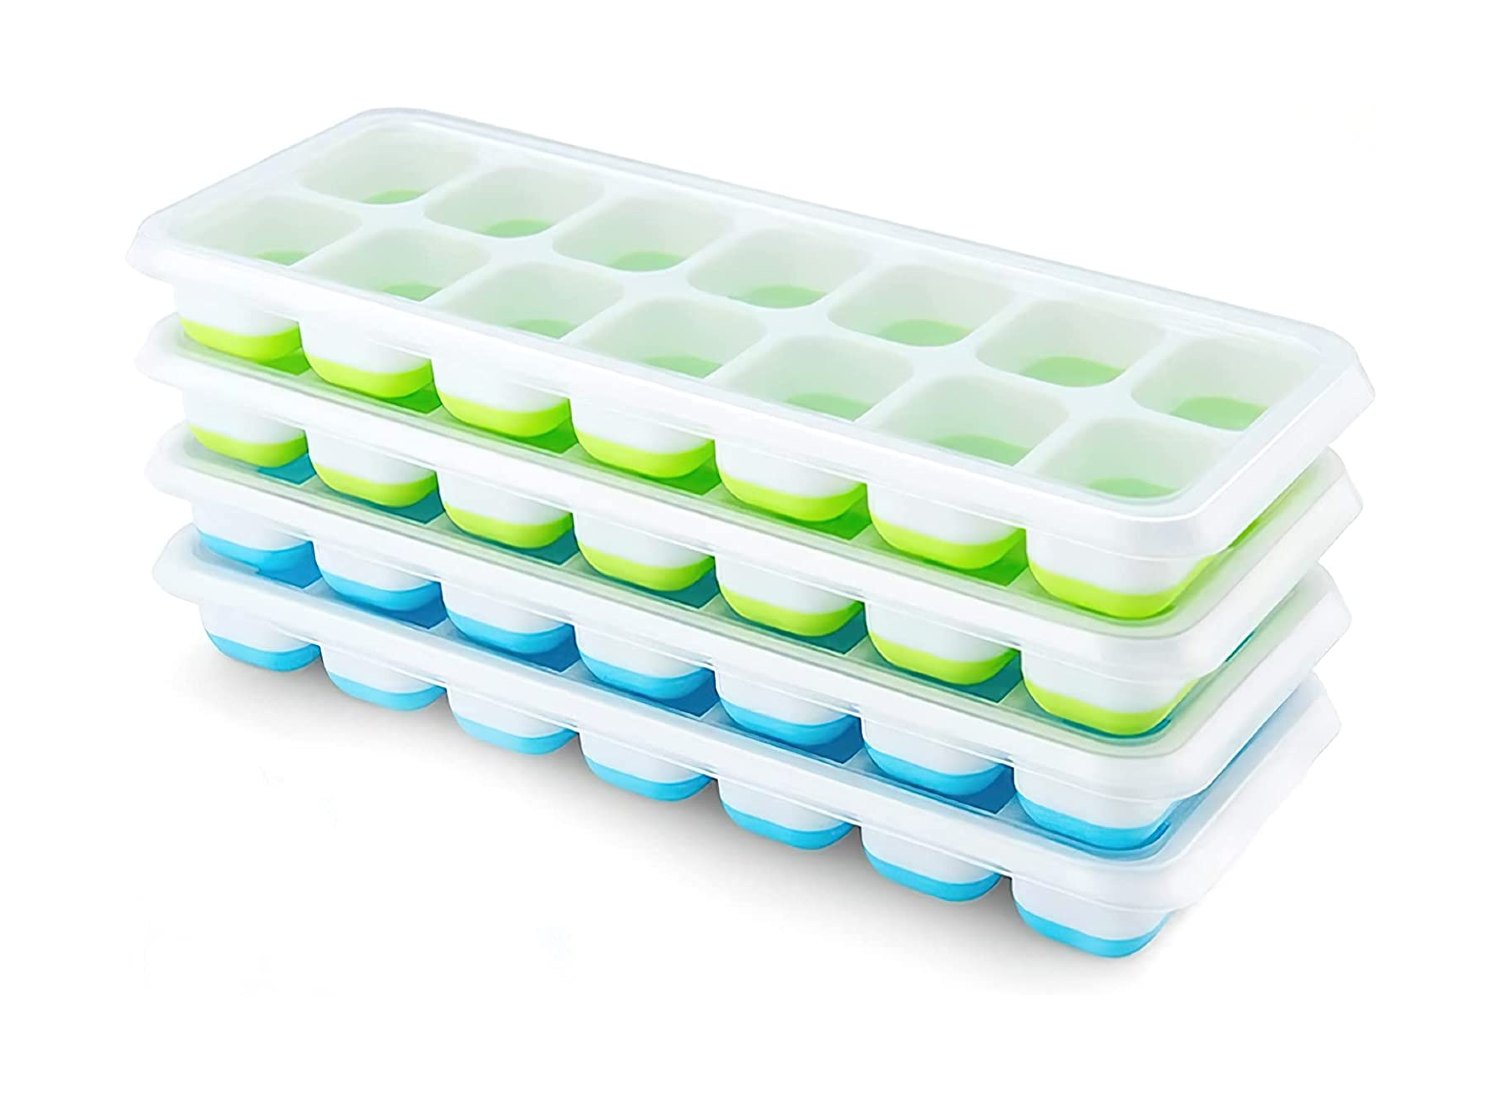 Single Ice Cube Tray With Lid, Flexible Food Grade Silicone Ice